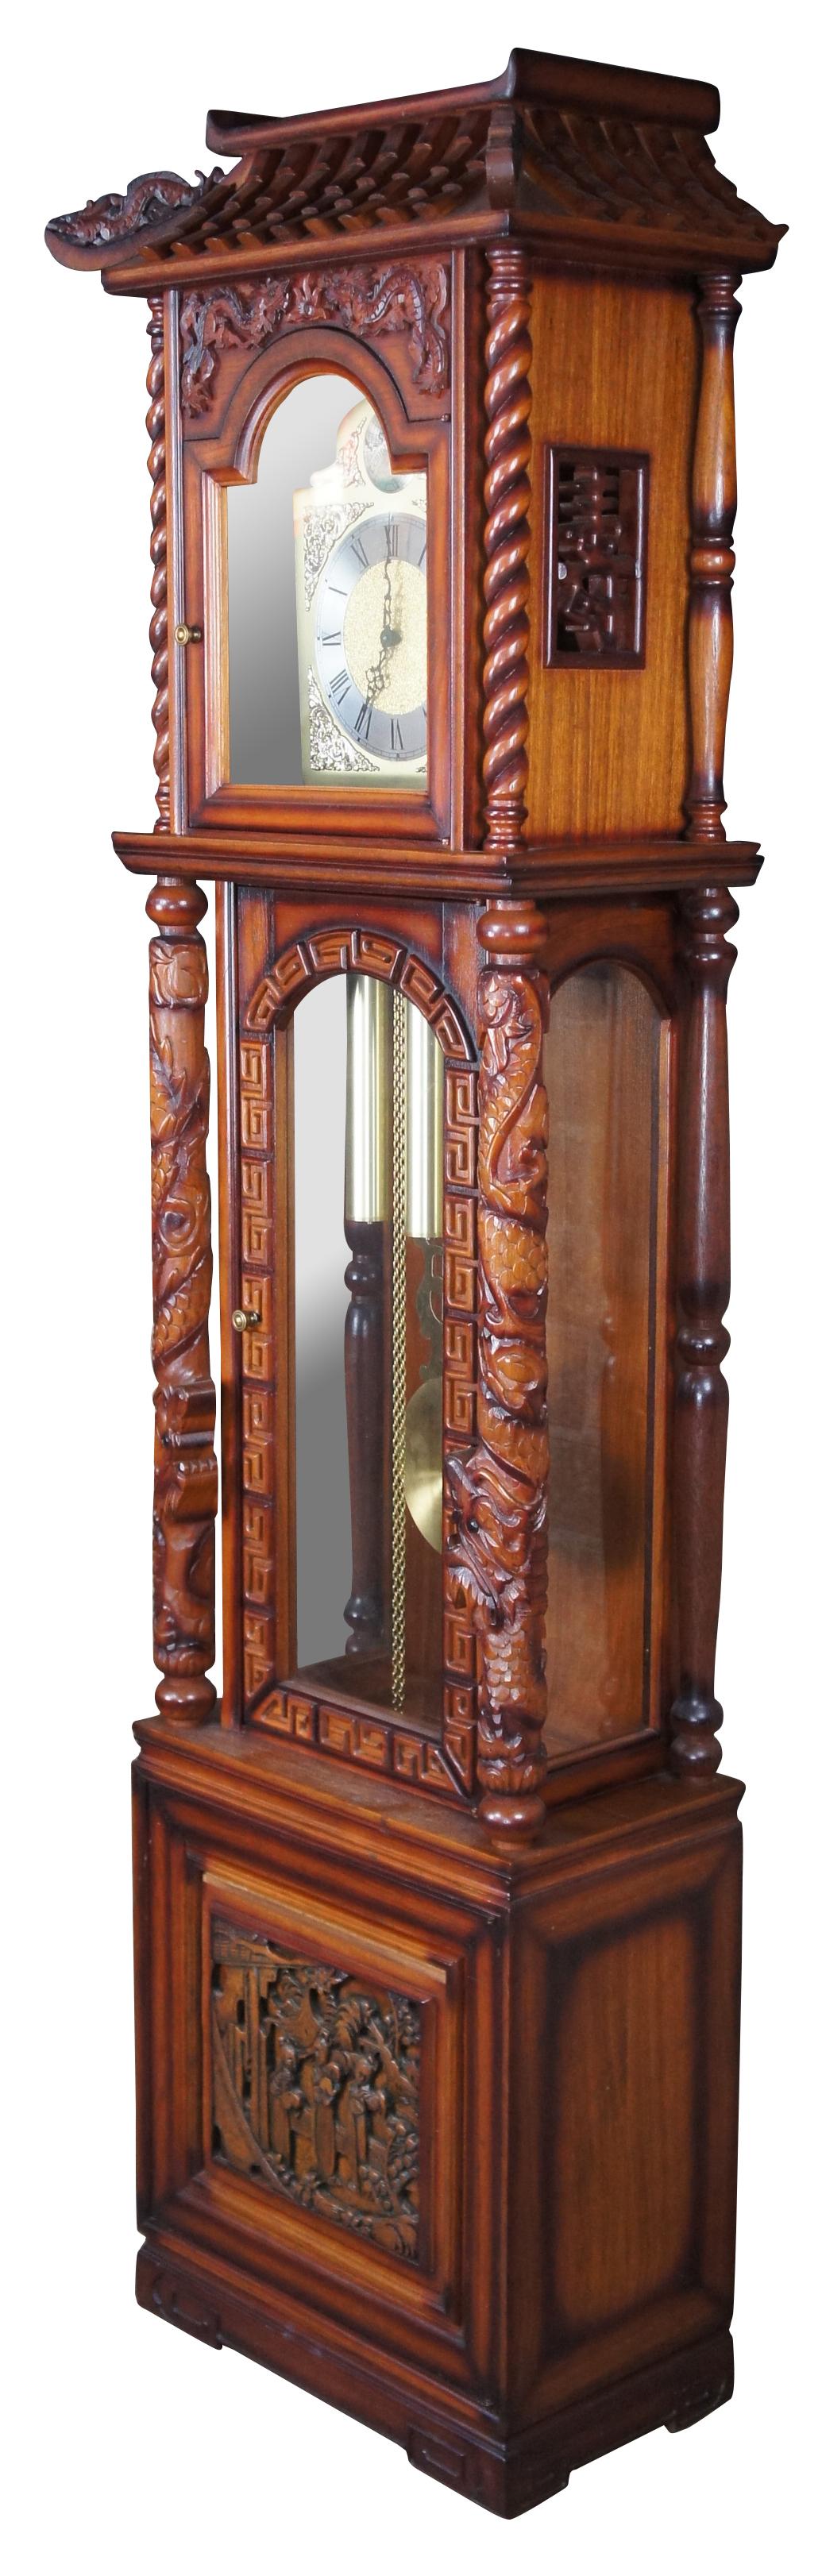 An impressive oriental chinoiserie Tempus Fugit Grandfather Clock made in Okinawa Japan, circa 1970s. Hand Crafted from oak with pagoda form crown and dragon motif throughout. Features central windows flanked by barley twised and dragon carved